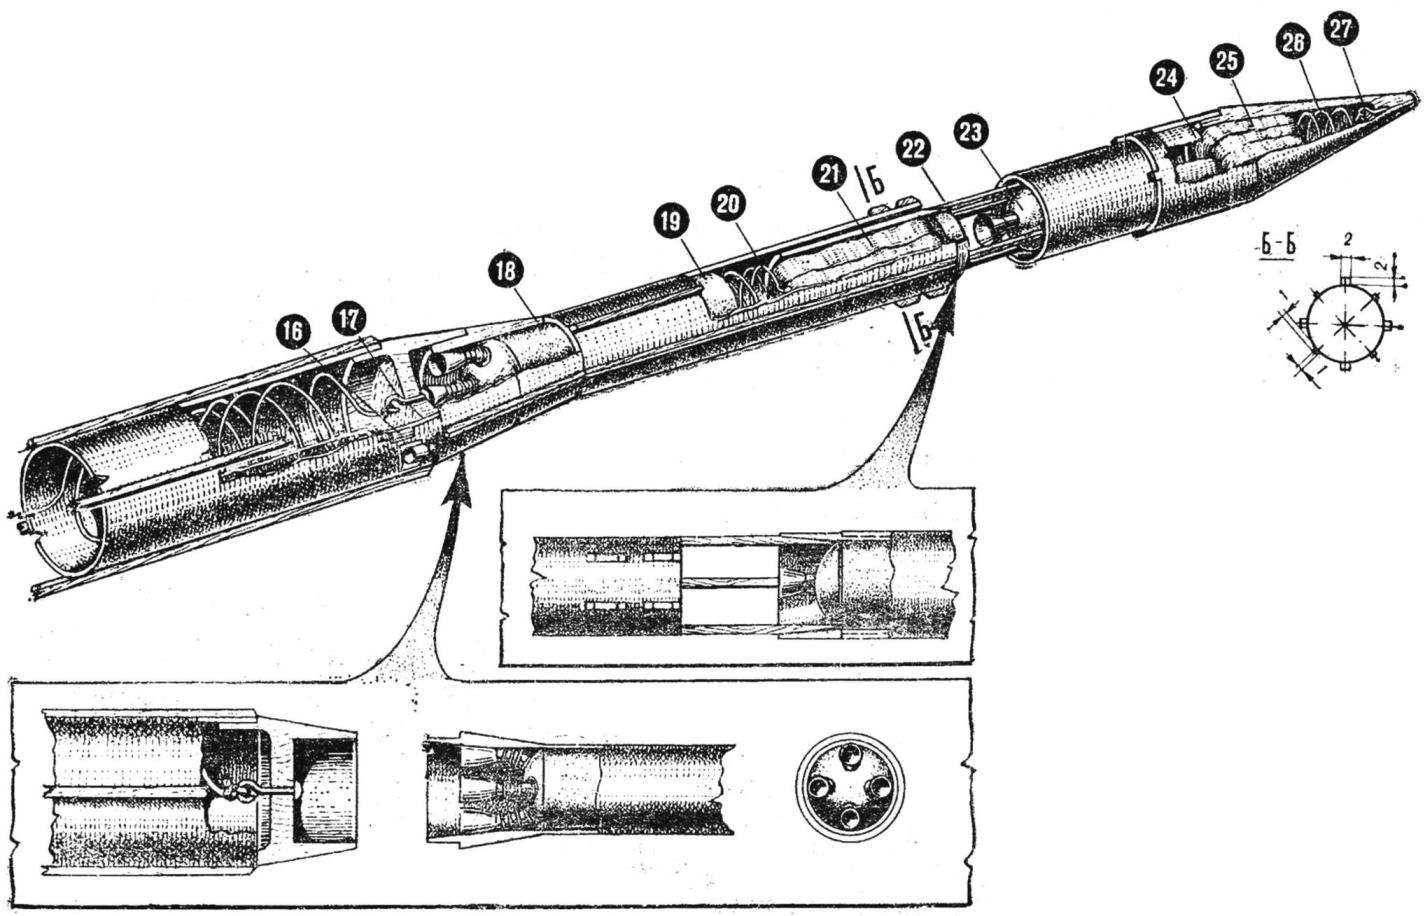 Fig. 1. The appearance and design of the rocket 